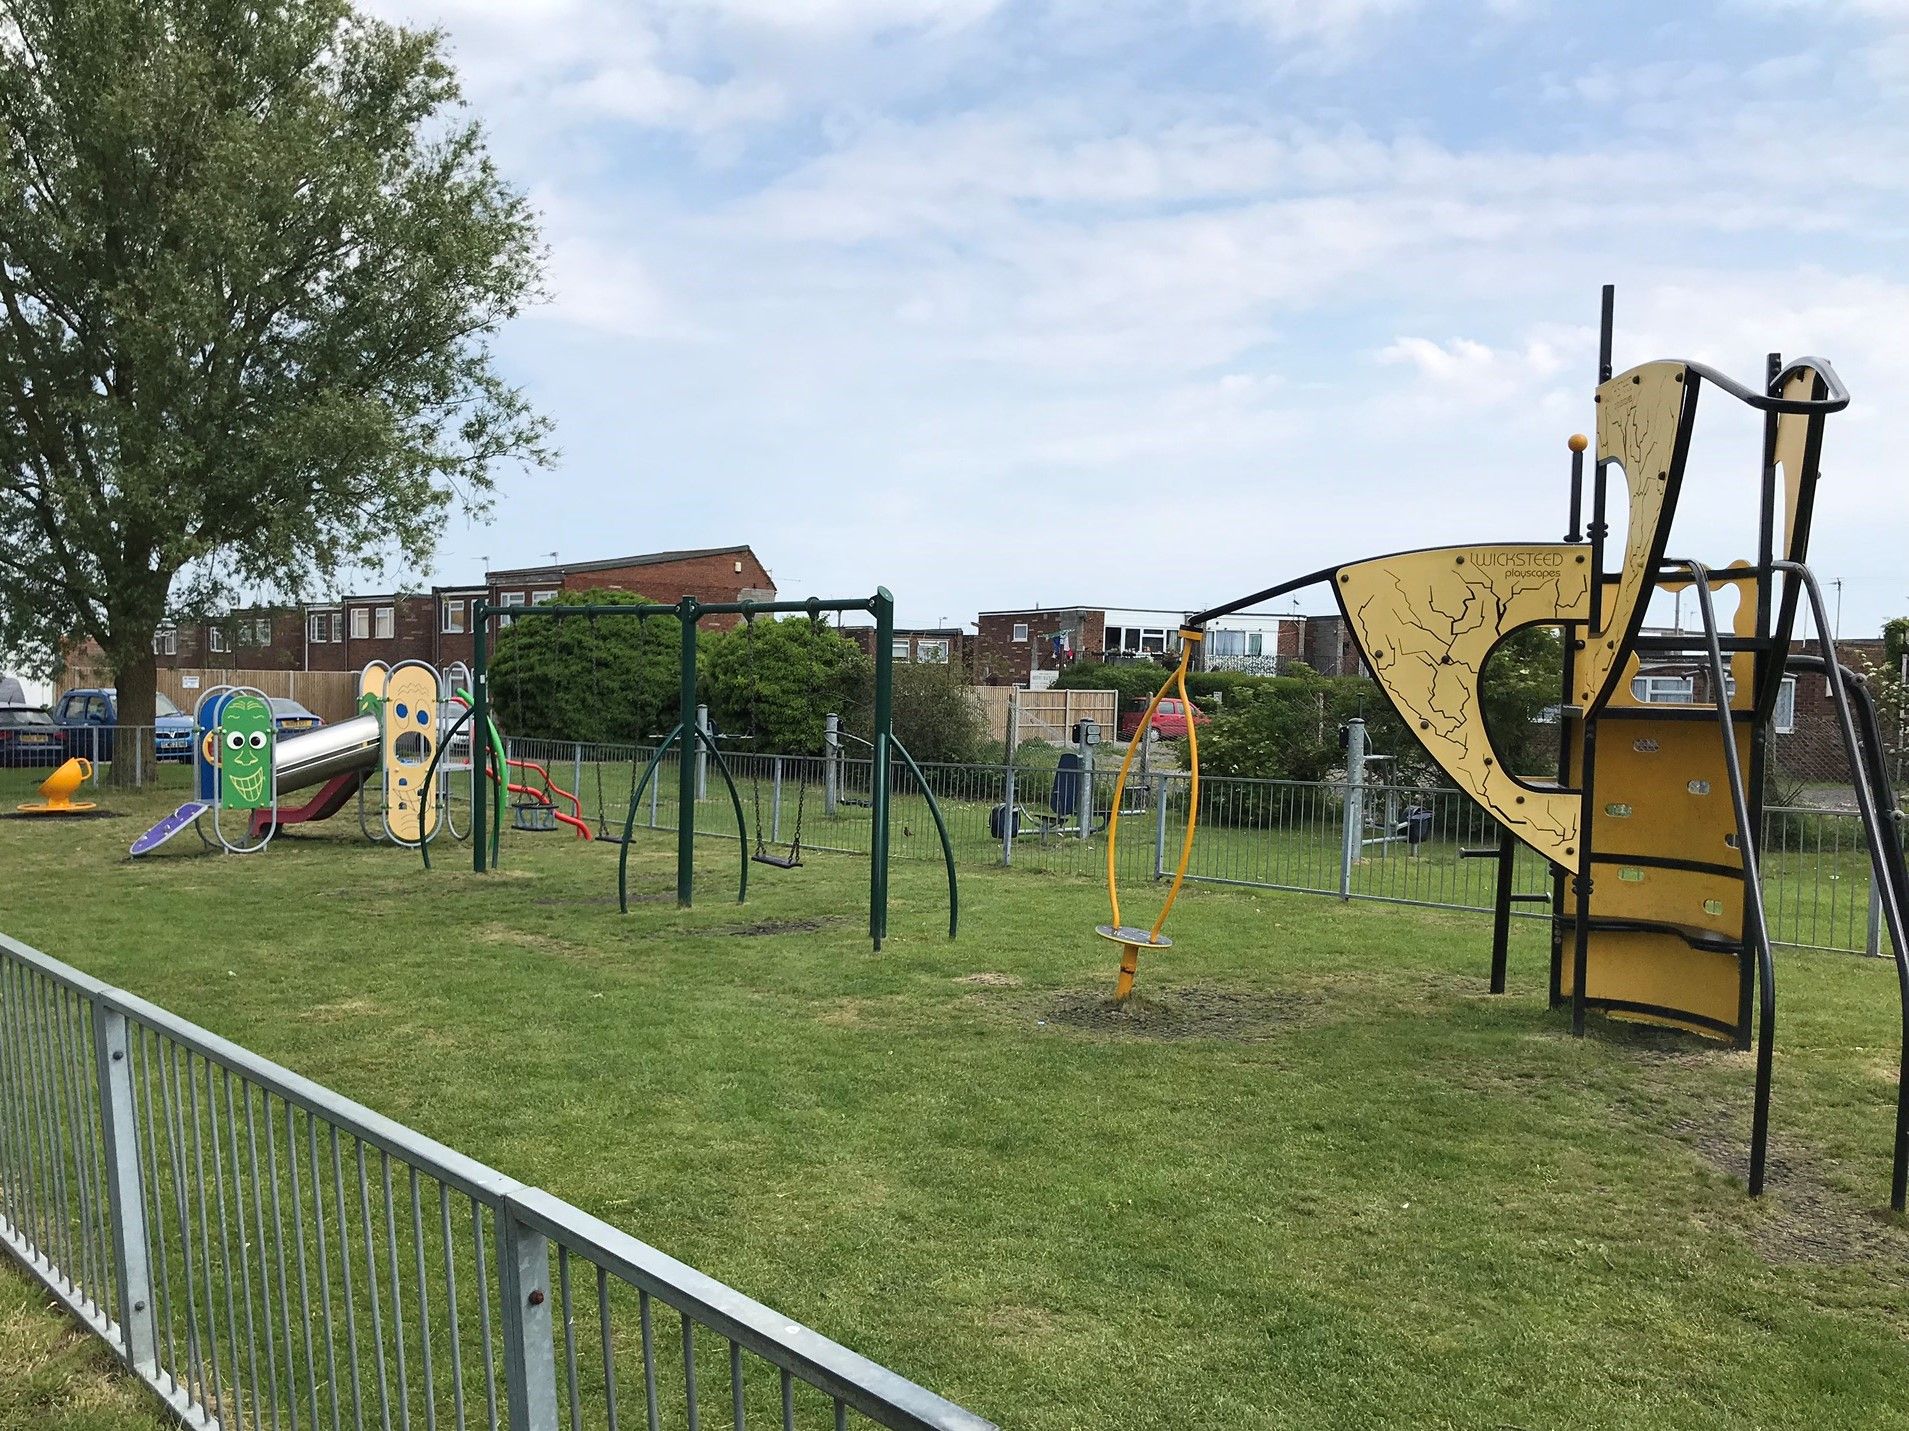 The childrens play area in The Spinney; climbing frames and slides